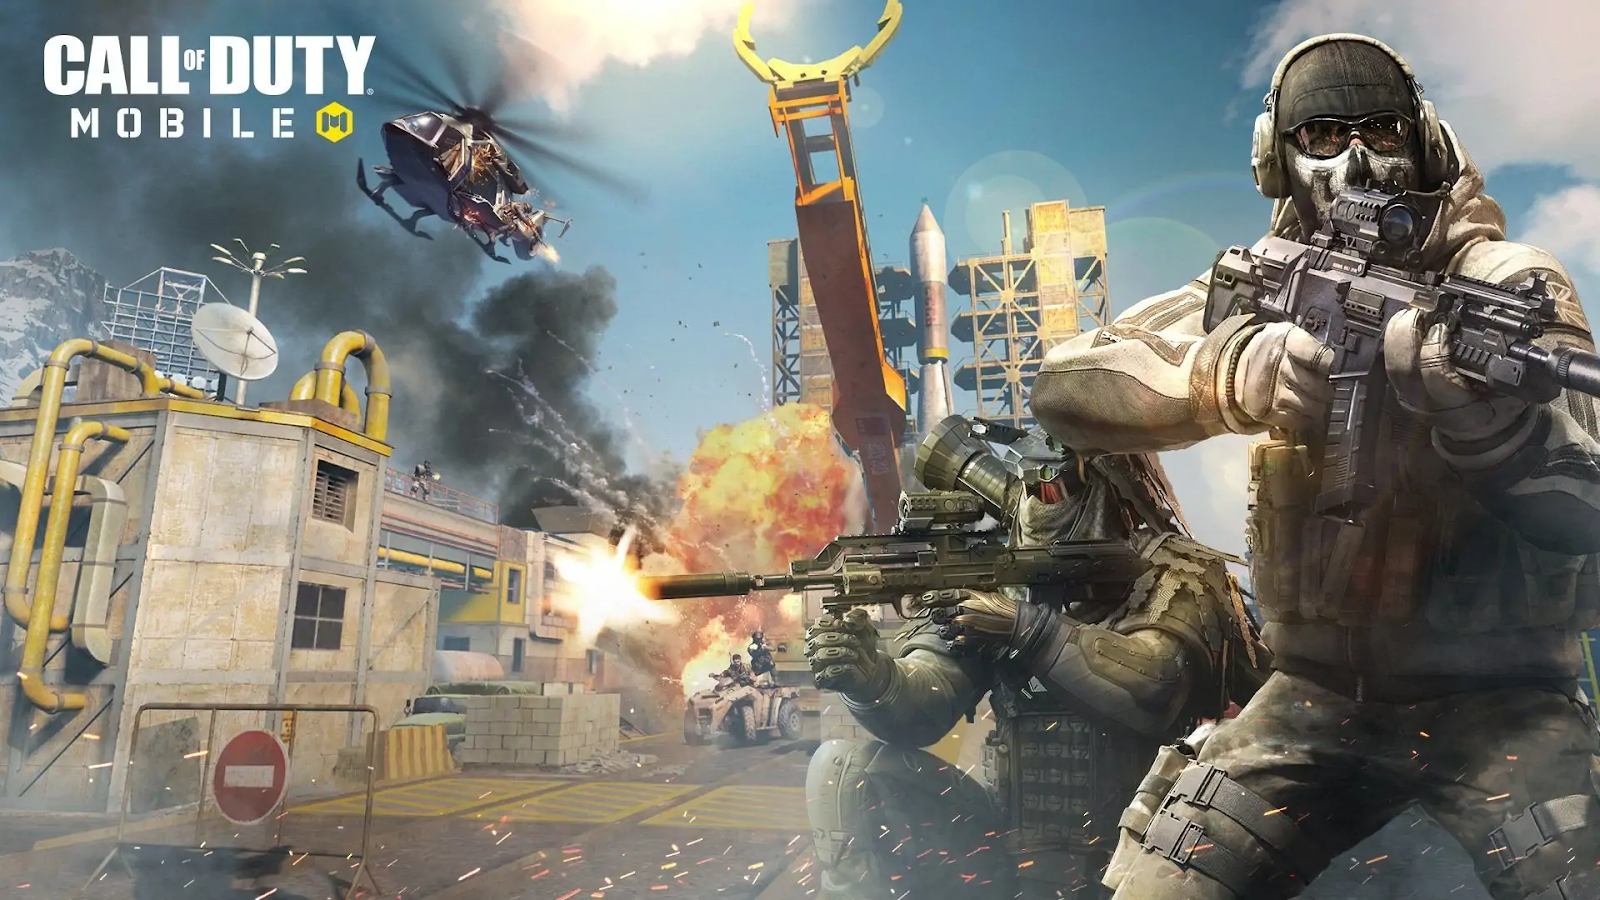 2. Call of Duty Mobile (TiMi Studios/Activision)